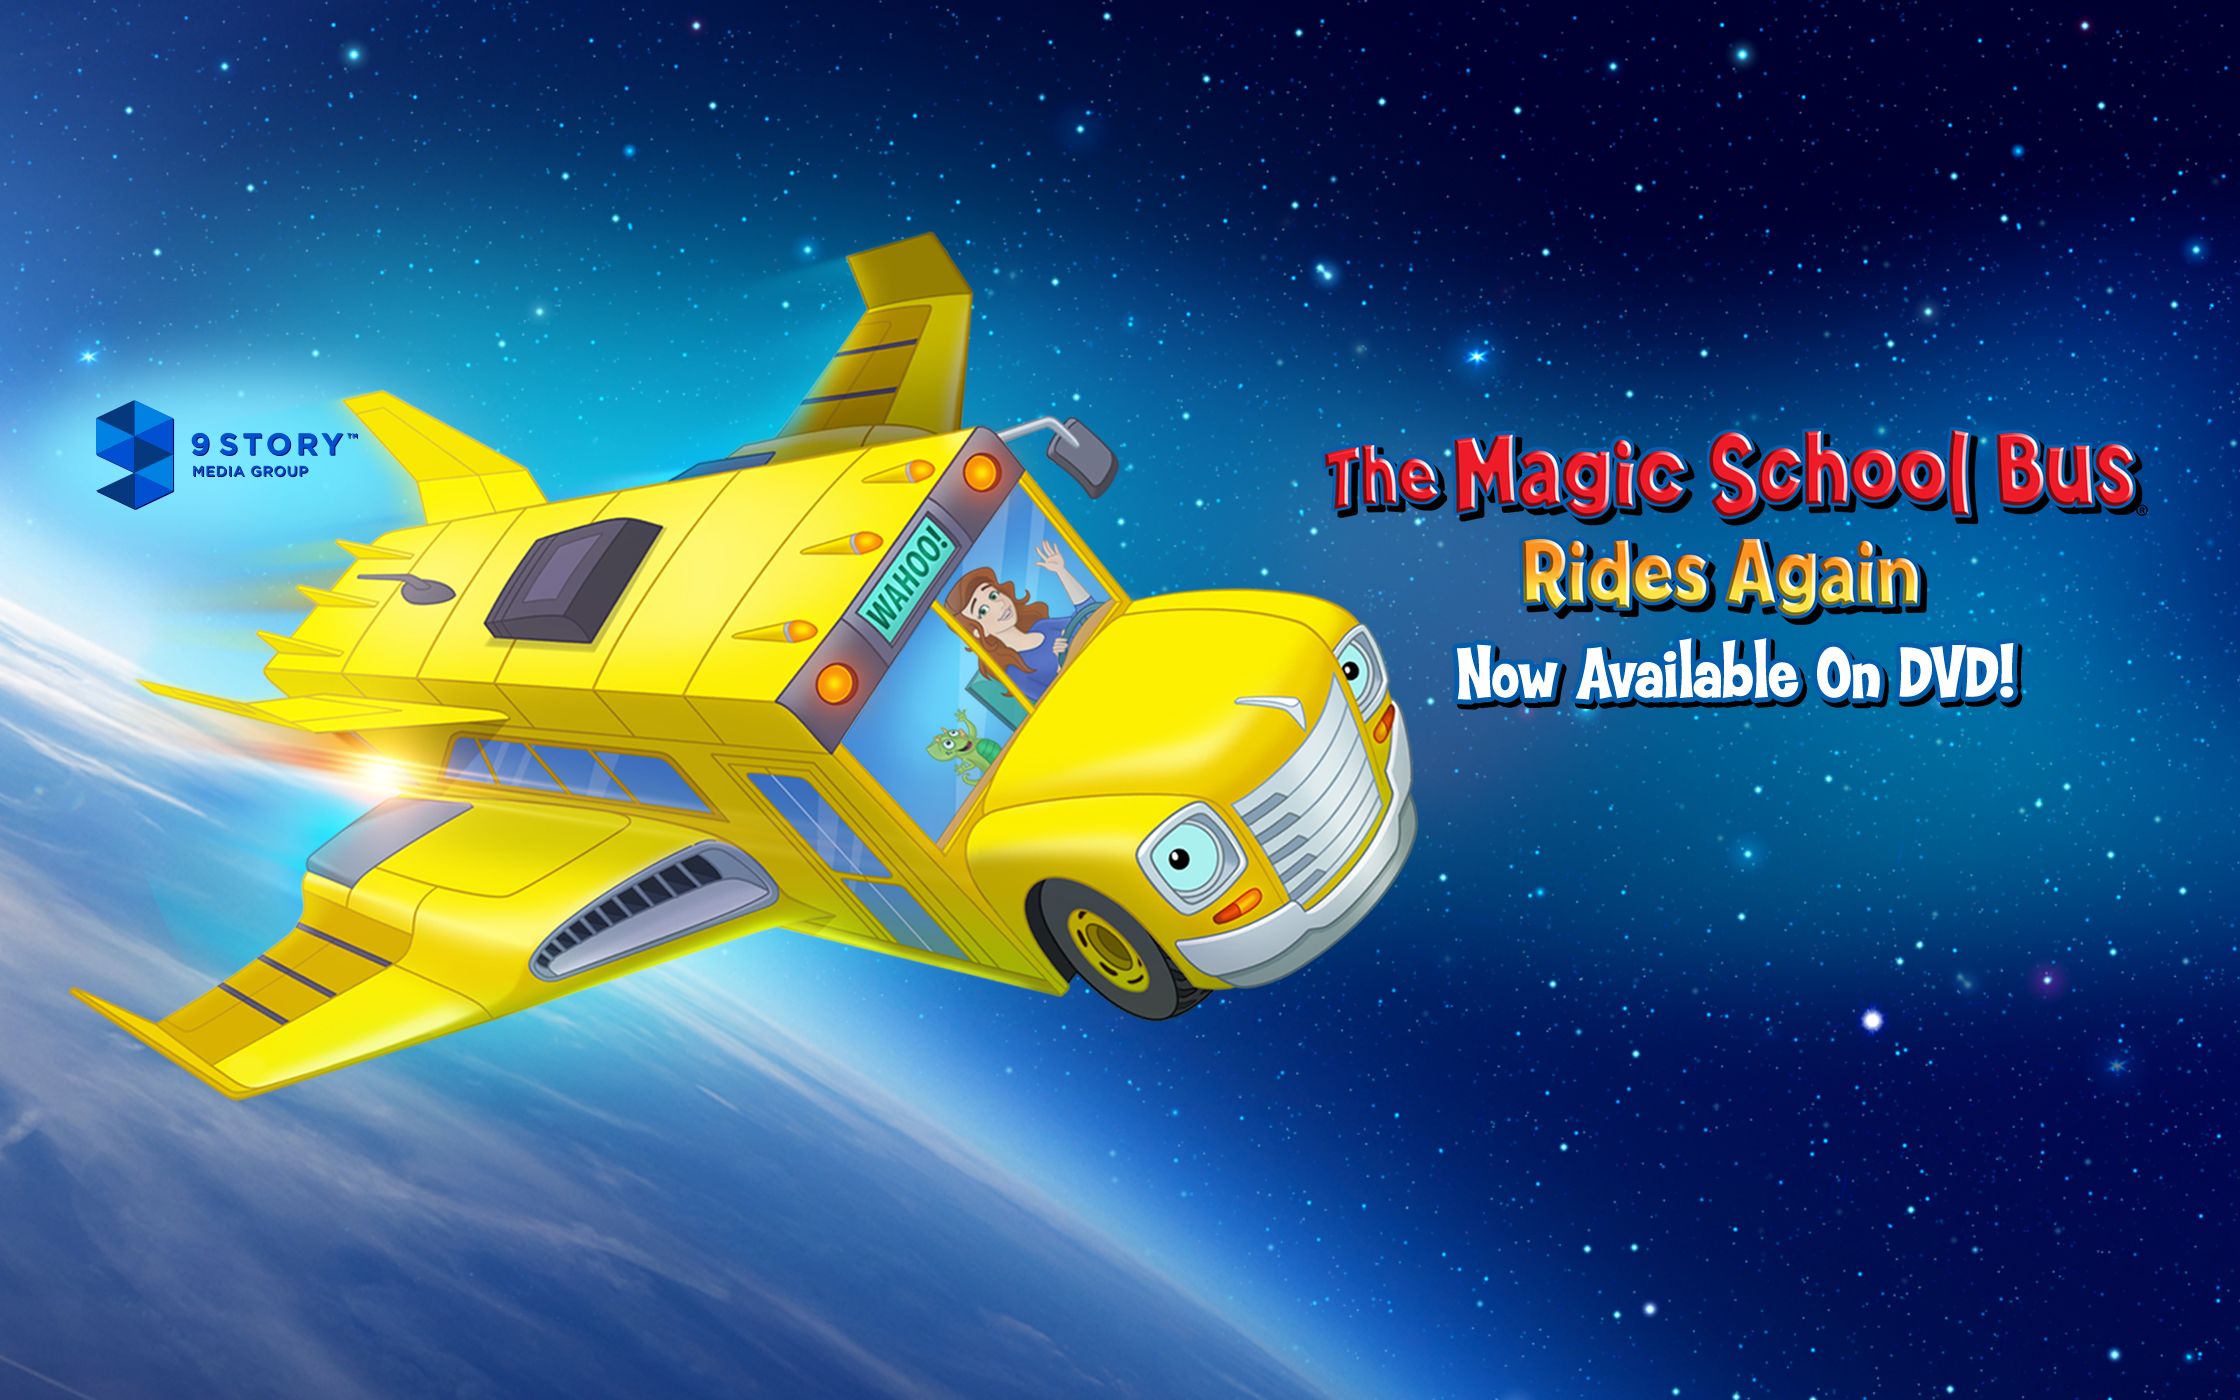 The Magic School Bus Rides Again Story Media Group